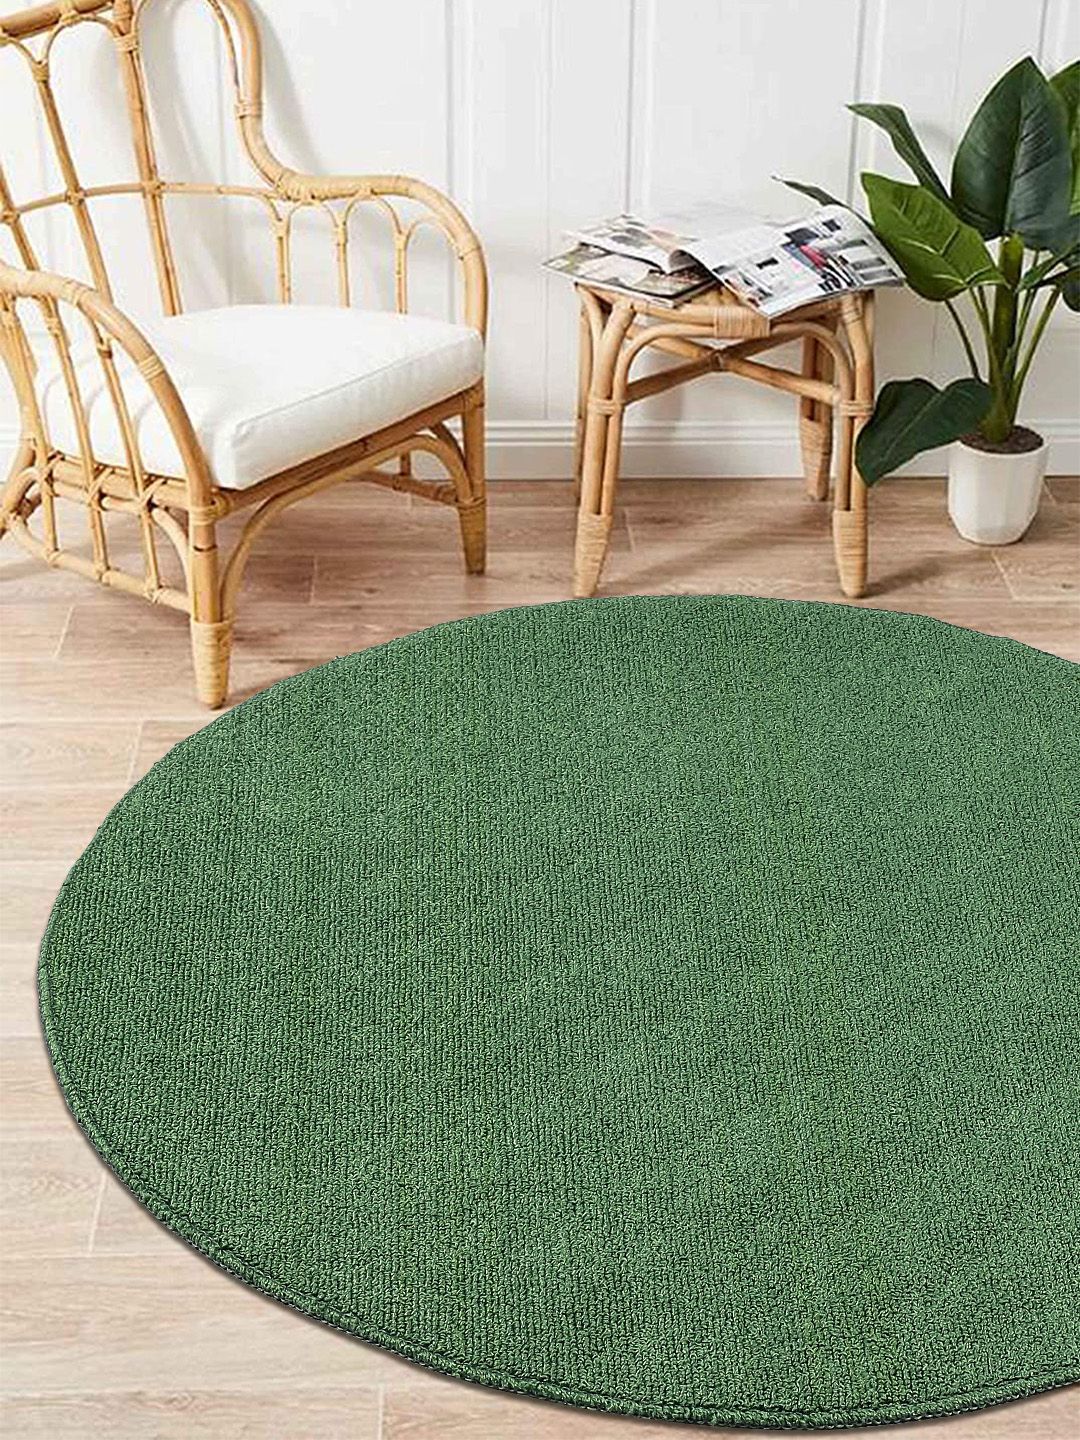 Saral Home Green Solid PP-Yarn Round Anti-Skid Multi-Use Floor Mat Price in India